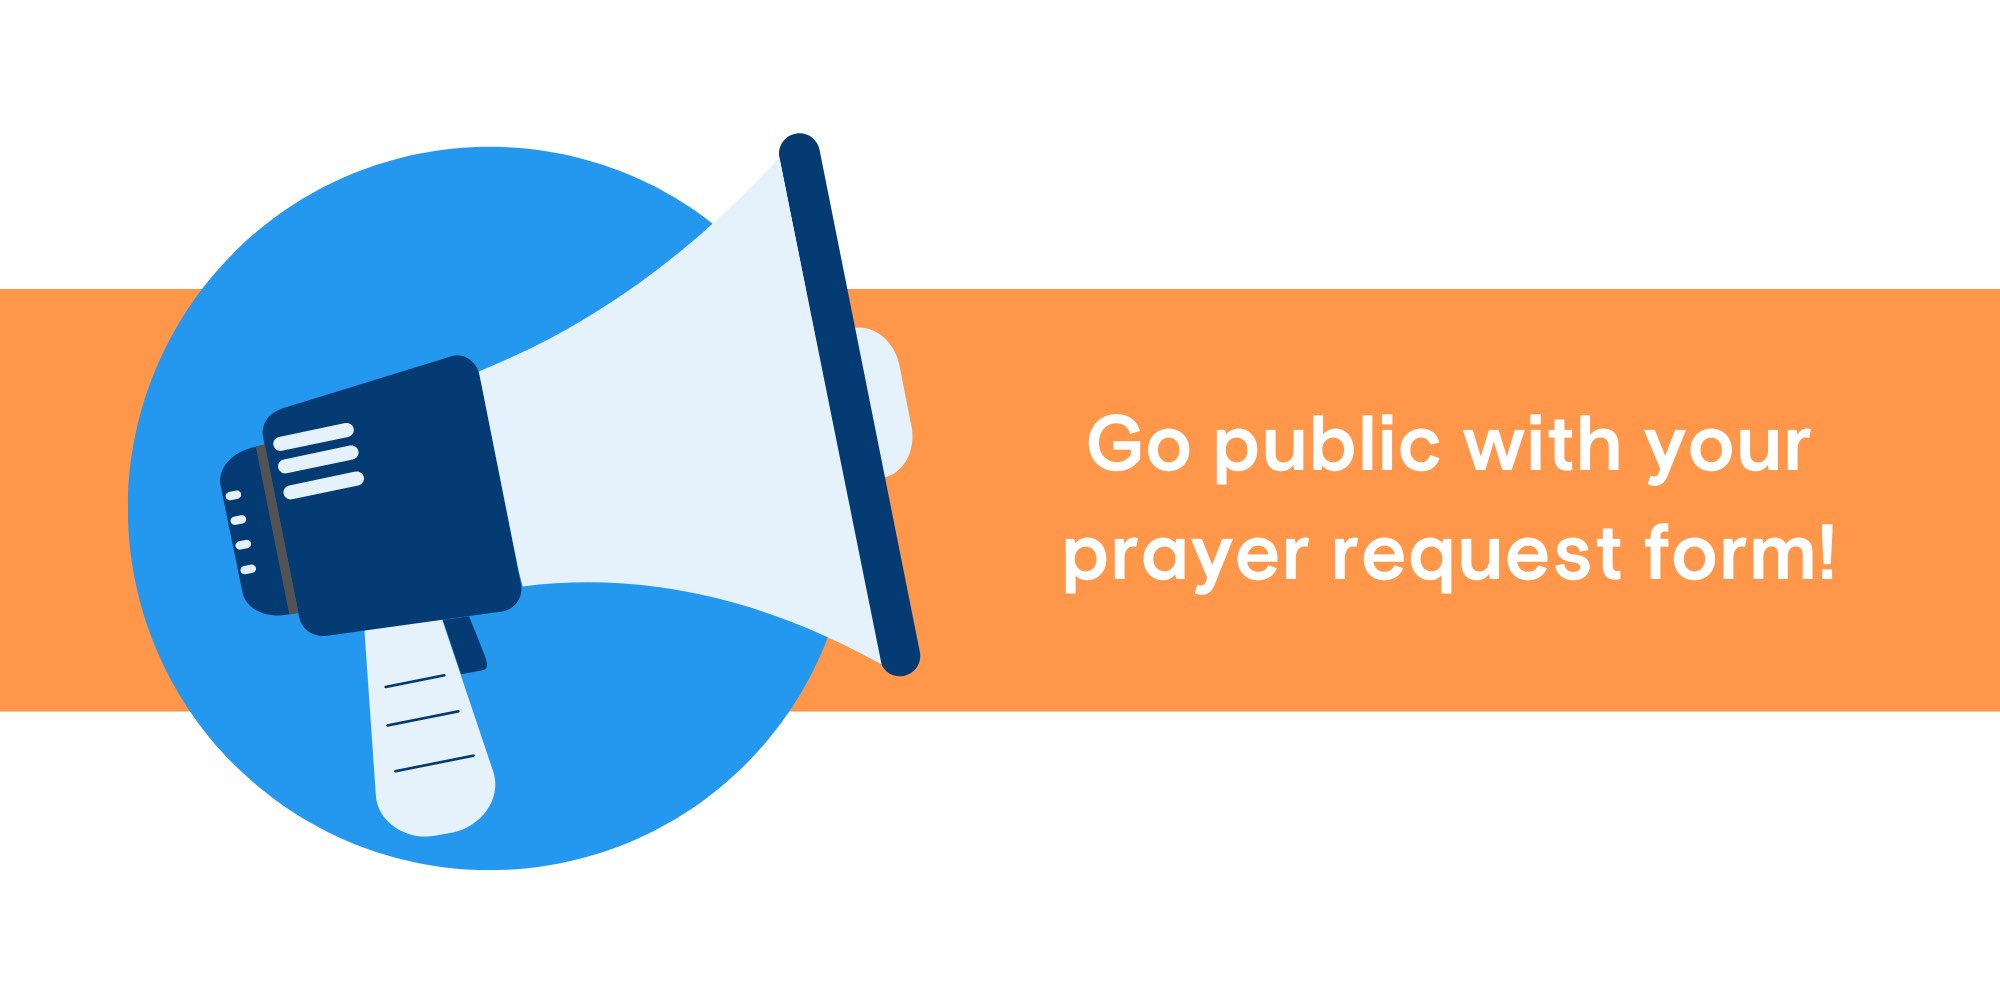 Announce your online prayer request form to the world